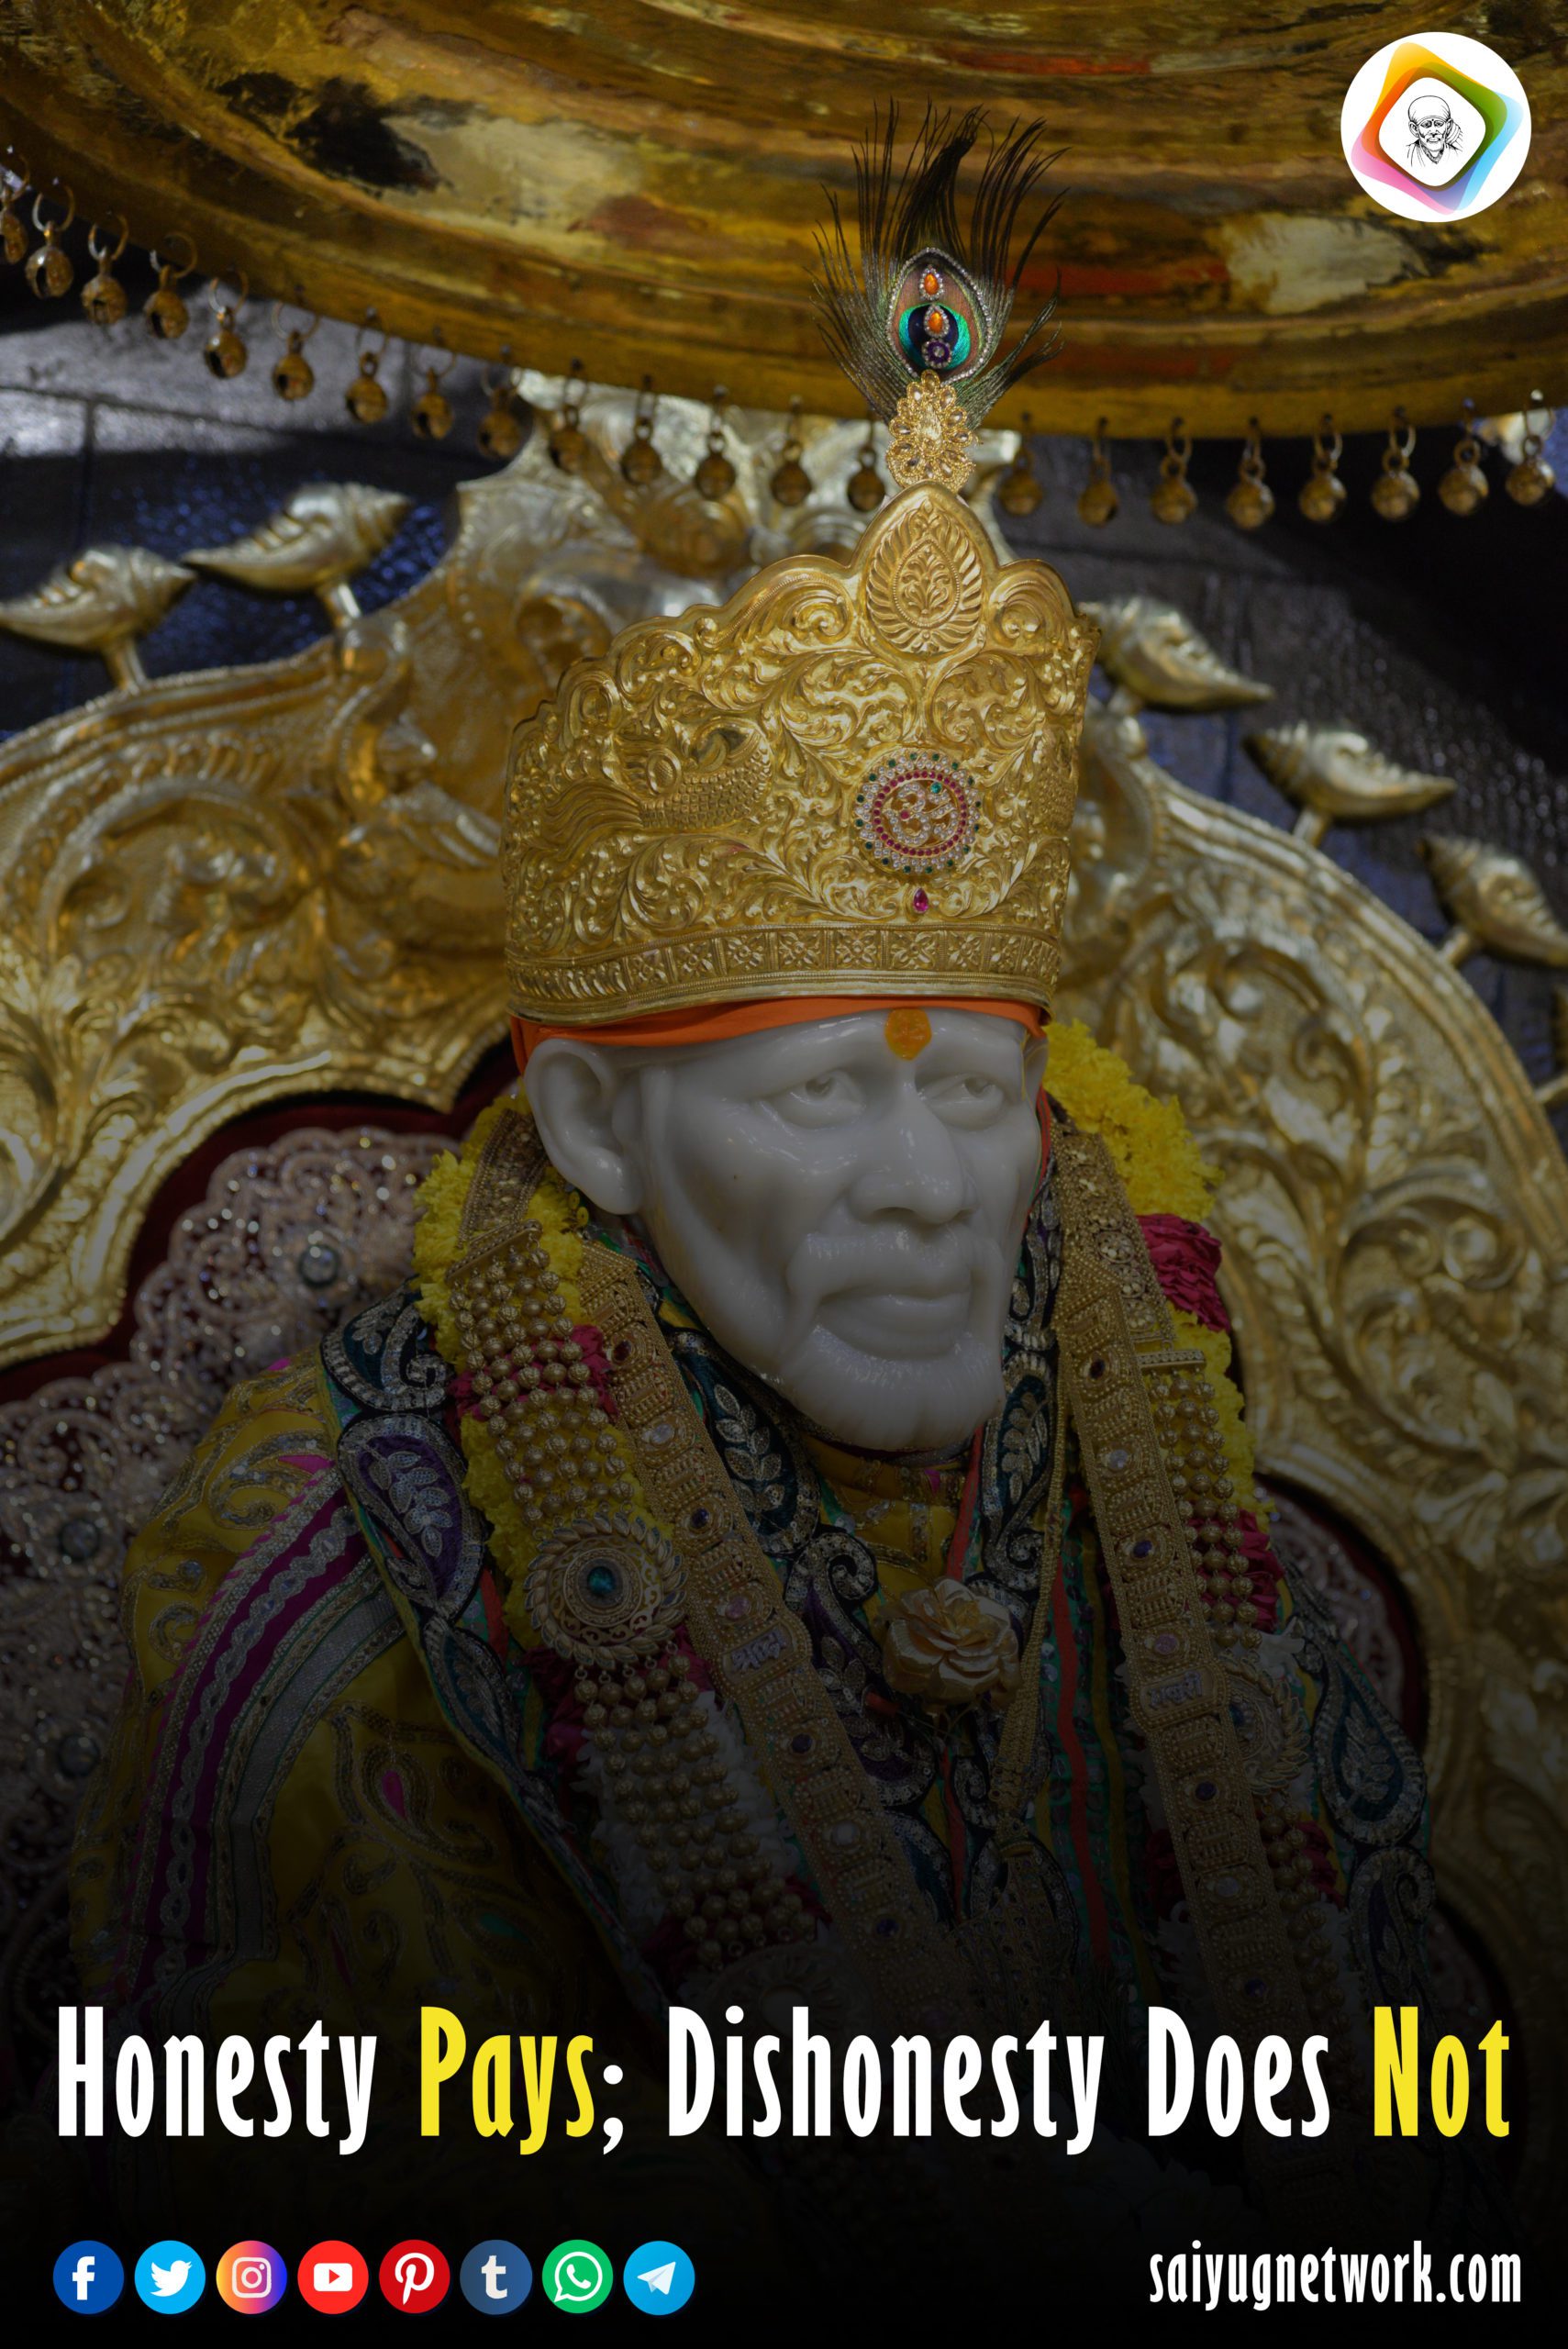 Shirdi Sai Baba Images Pictures Photos – Shirdi Sai Baba Experiences and  Miracles - Submit Your Experience Now